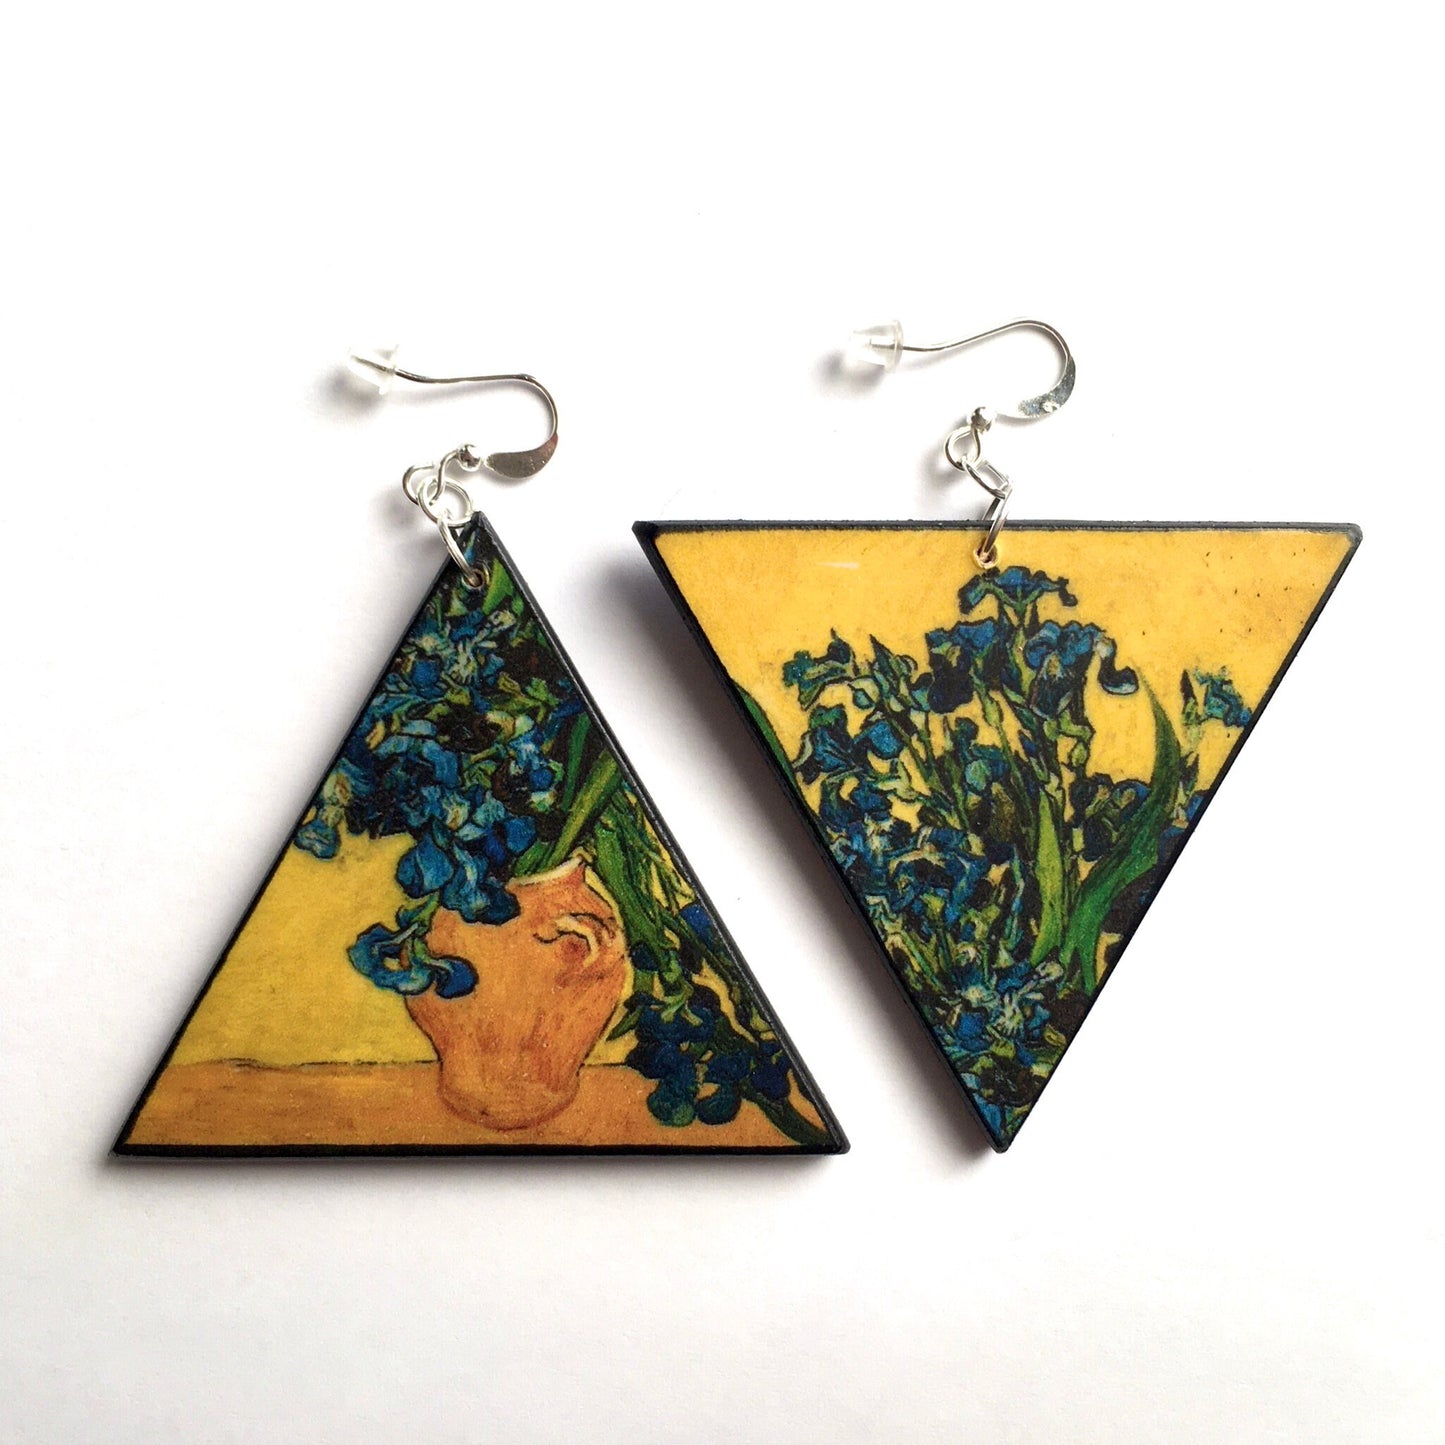 Van Gogh inspired Obljewellery. These triangular, asymmetrical earrings, with a detail of the painting Vase with Irises against a Yellow Background are made with sustainable wood.